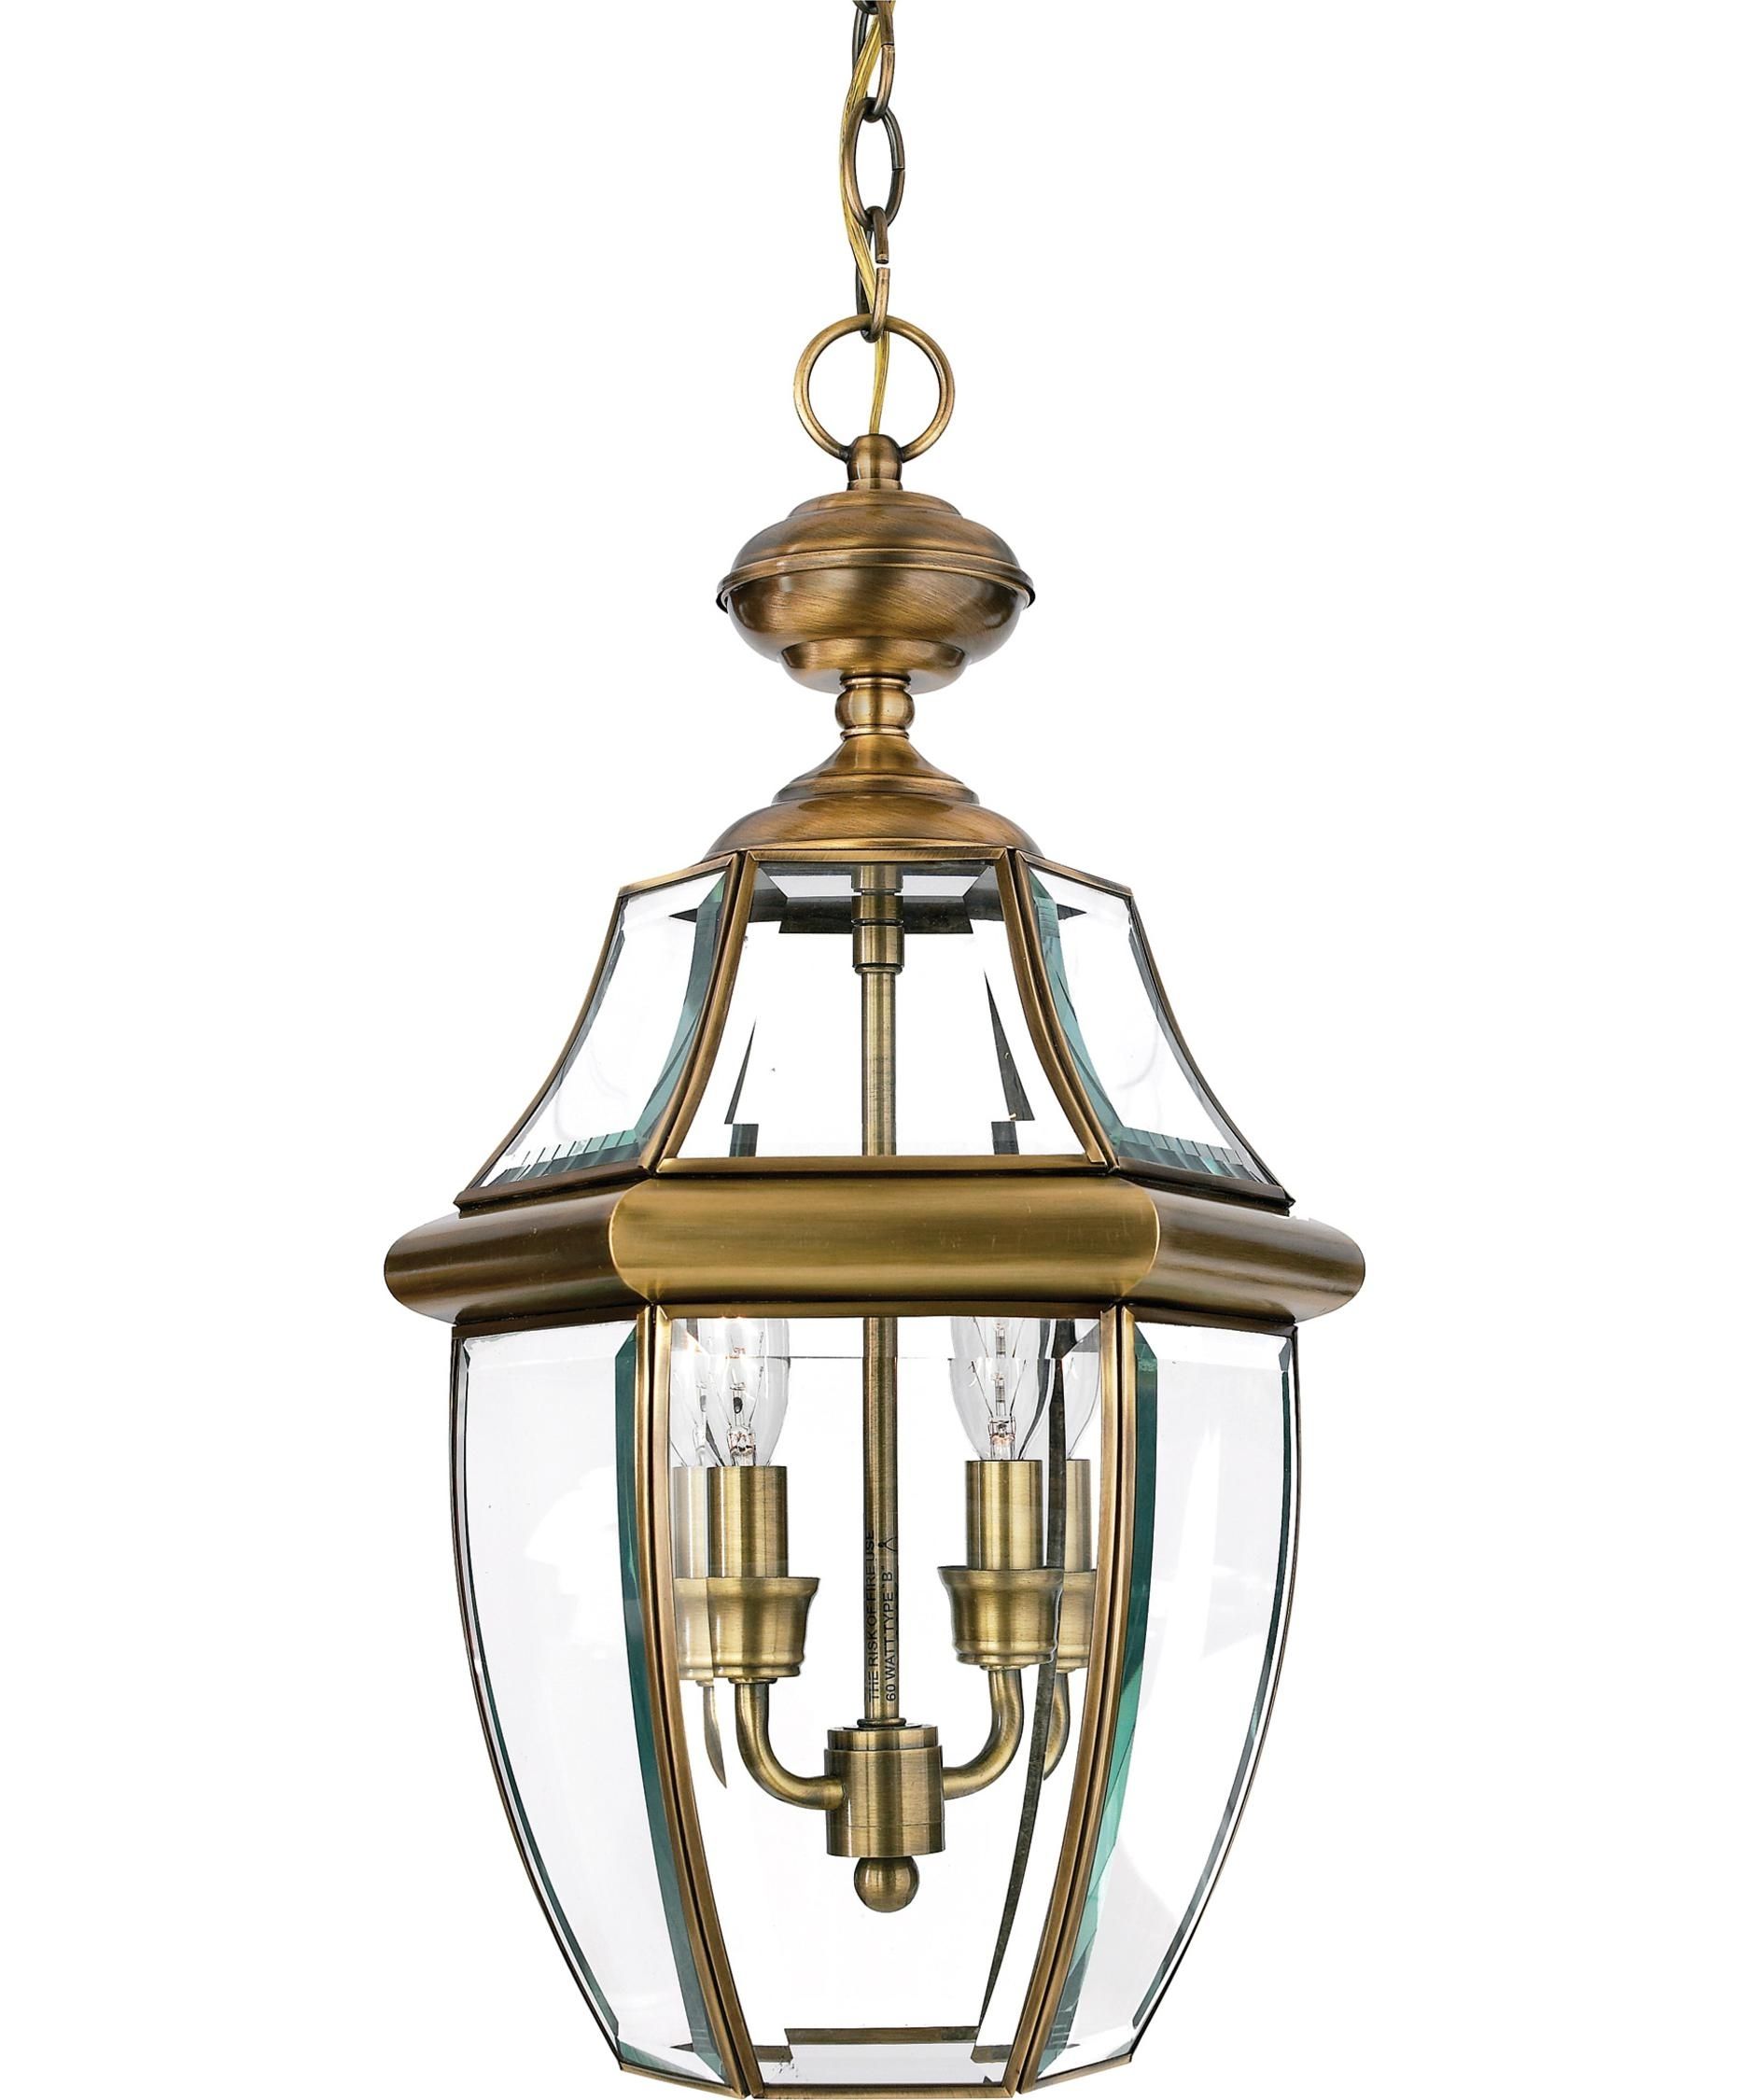 Quoizel Ny1178 Newbury 10 Inch Wide 2 Light Outdoor Hanging Lantern With Regard To Gold Outdoor Lanterns (View 8 of 20)